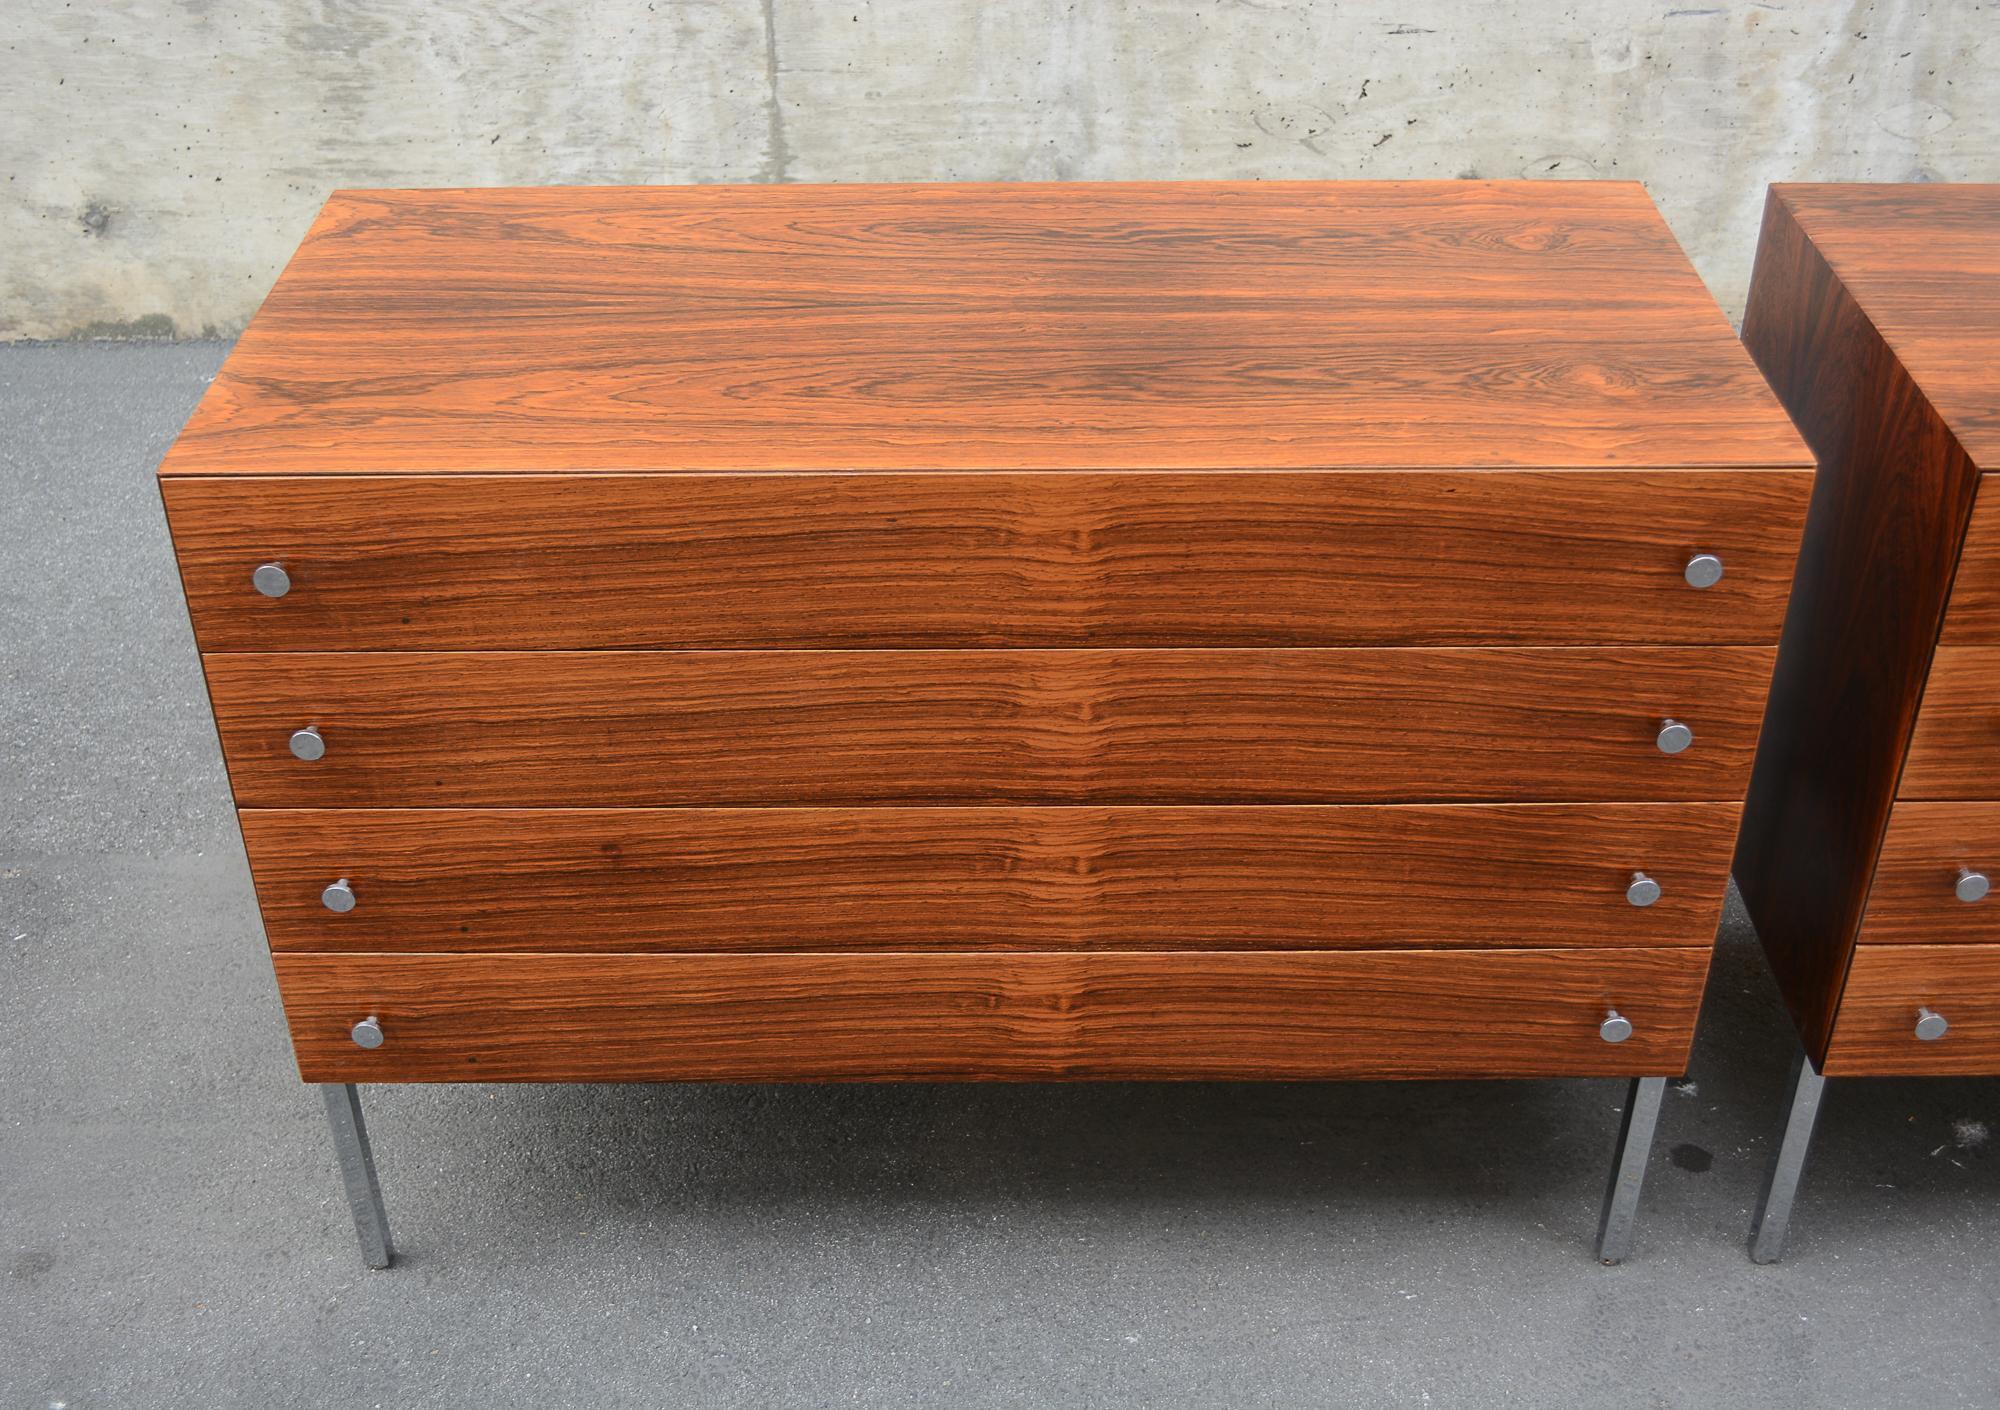 Chrome Pair of Rosewood Chests by Poul Norreklit for Sigurd Hansen For Sale